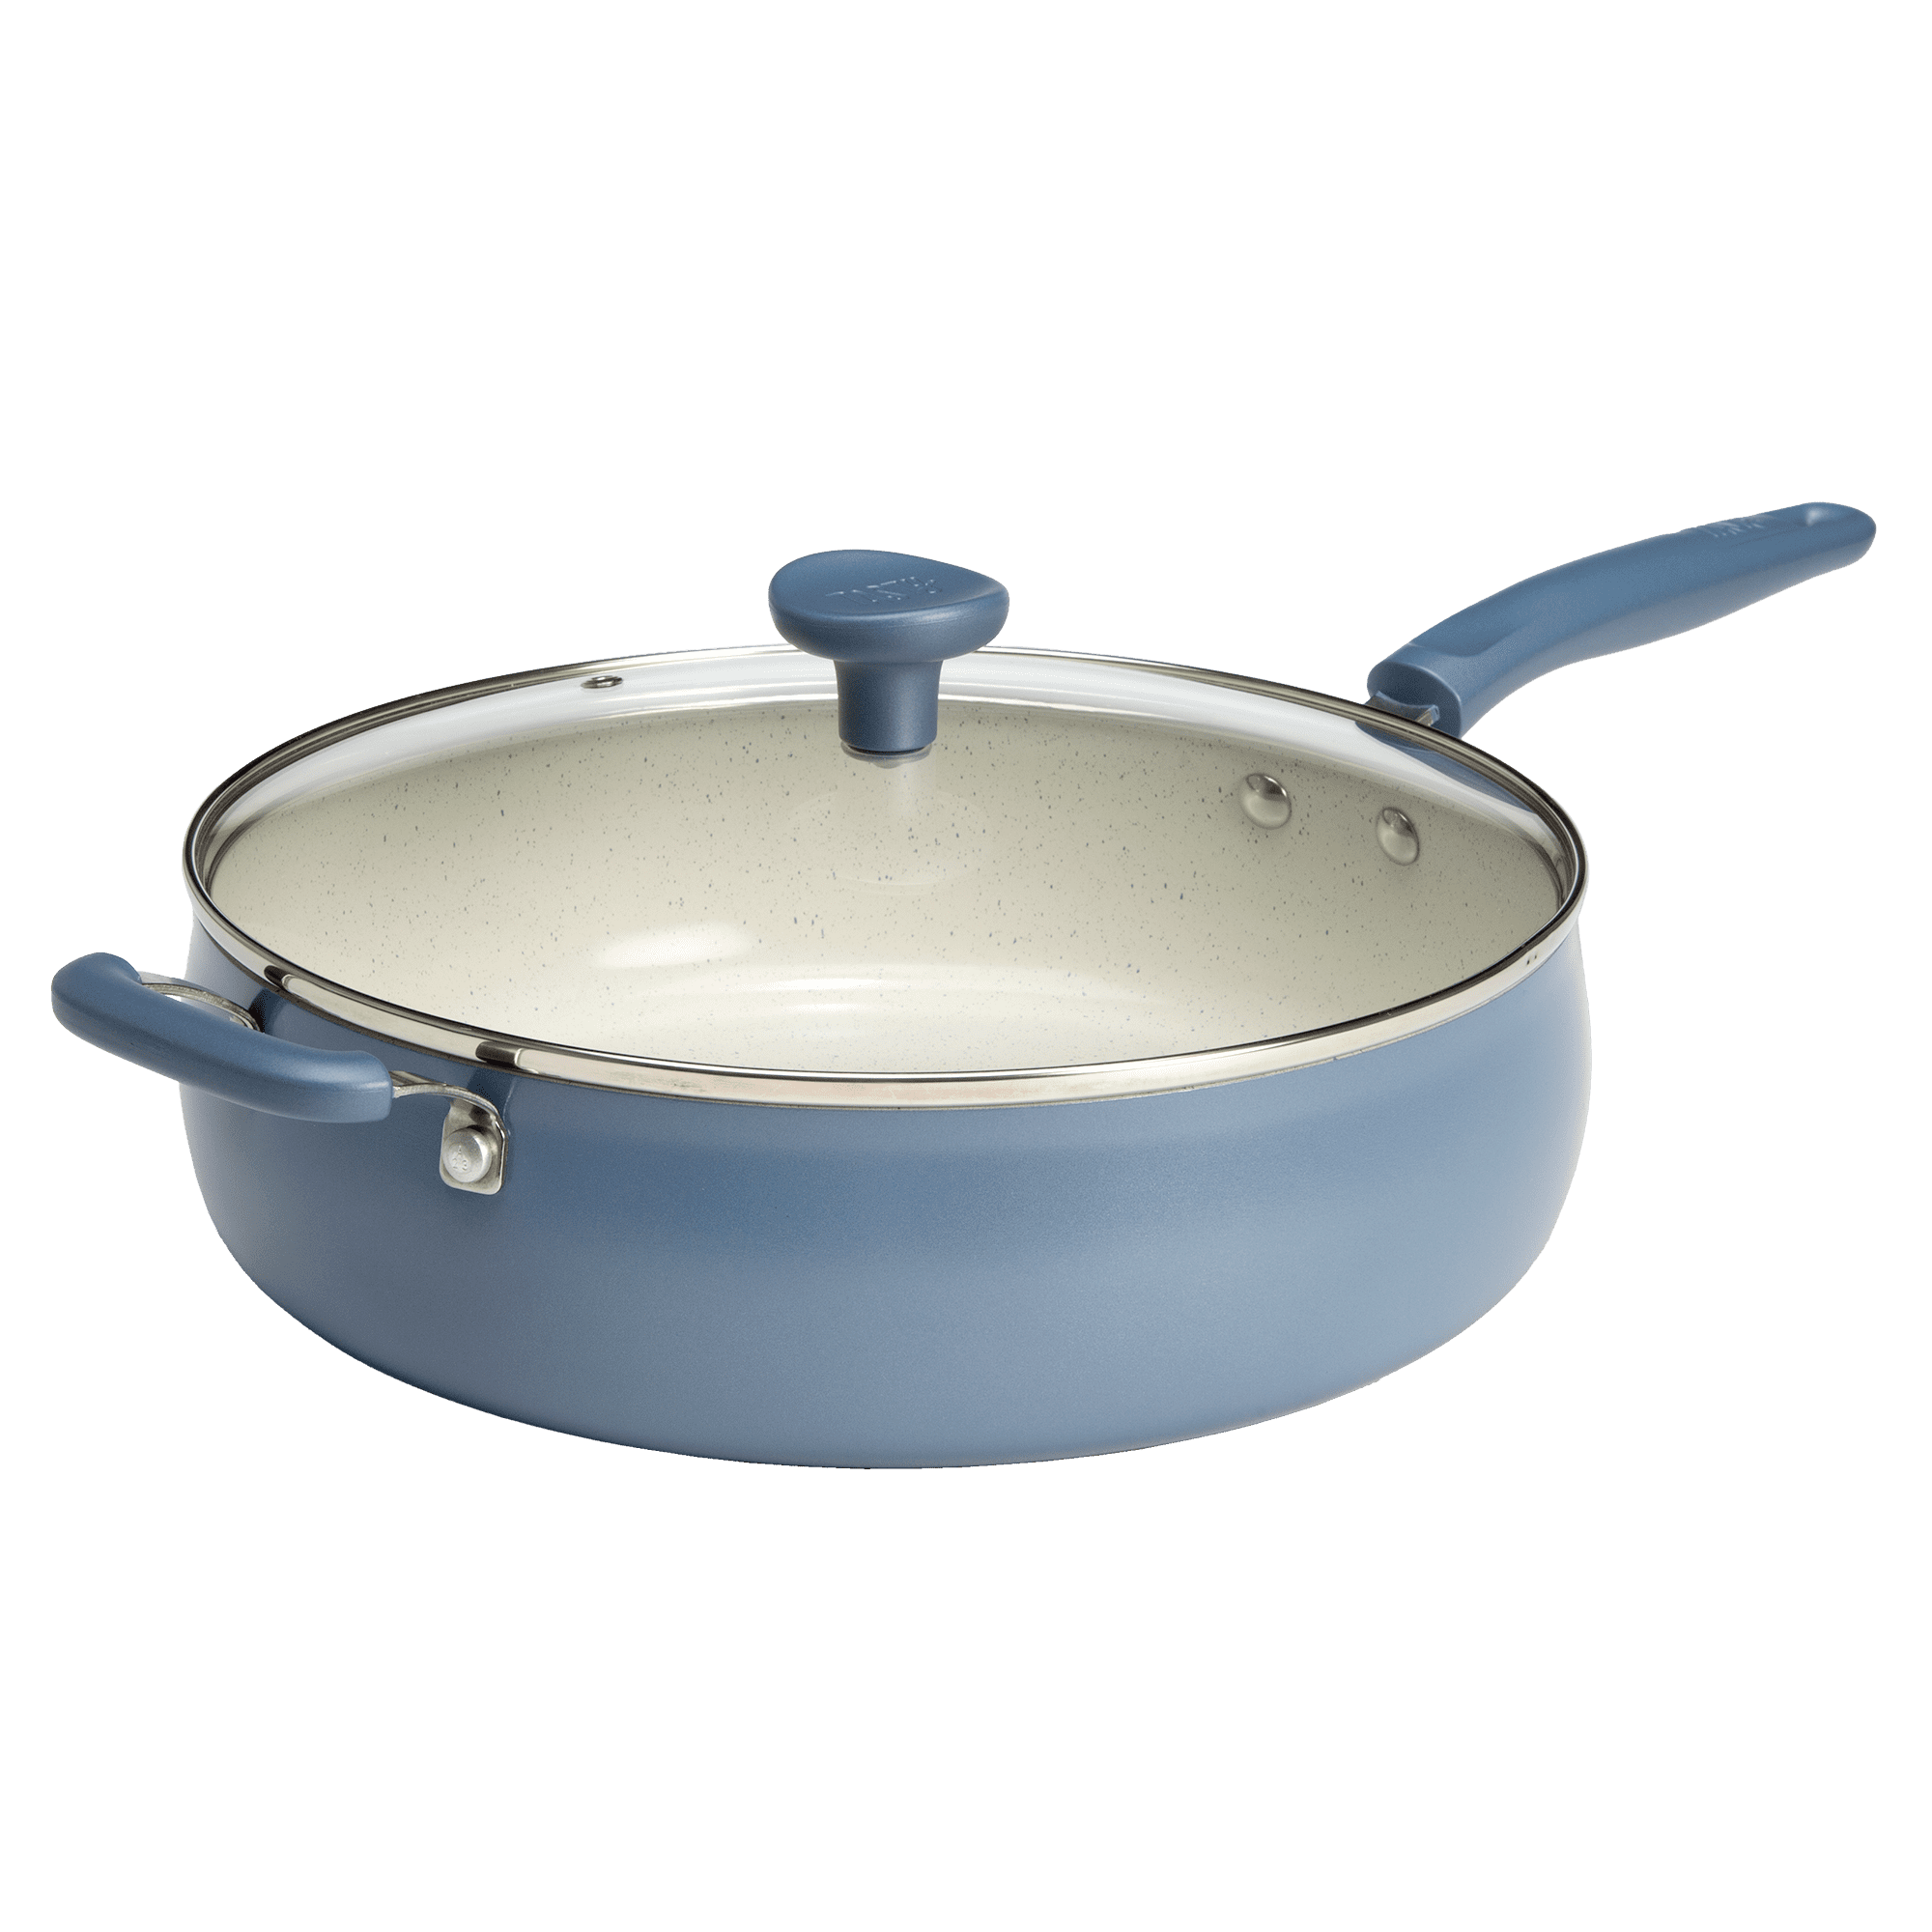 Total Nonstick 5qt Jumbo Cooker with Lid - 2774863